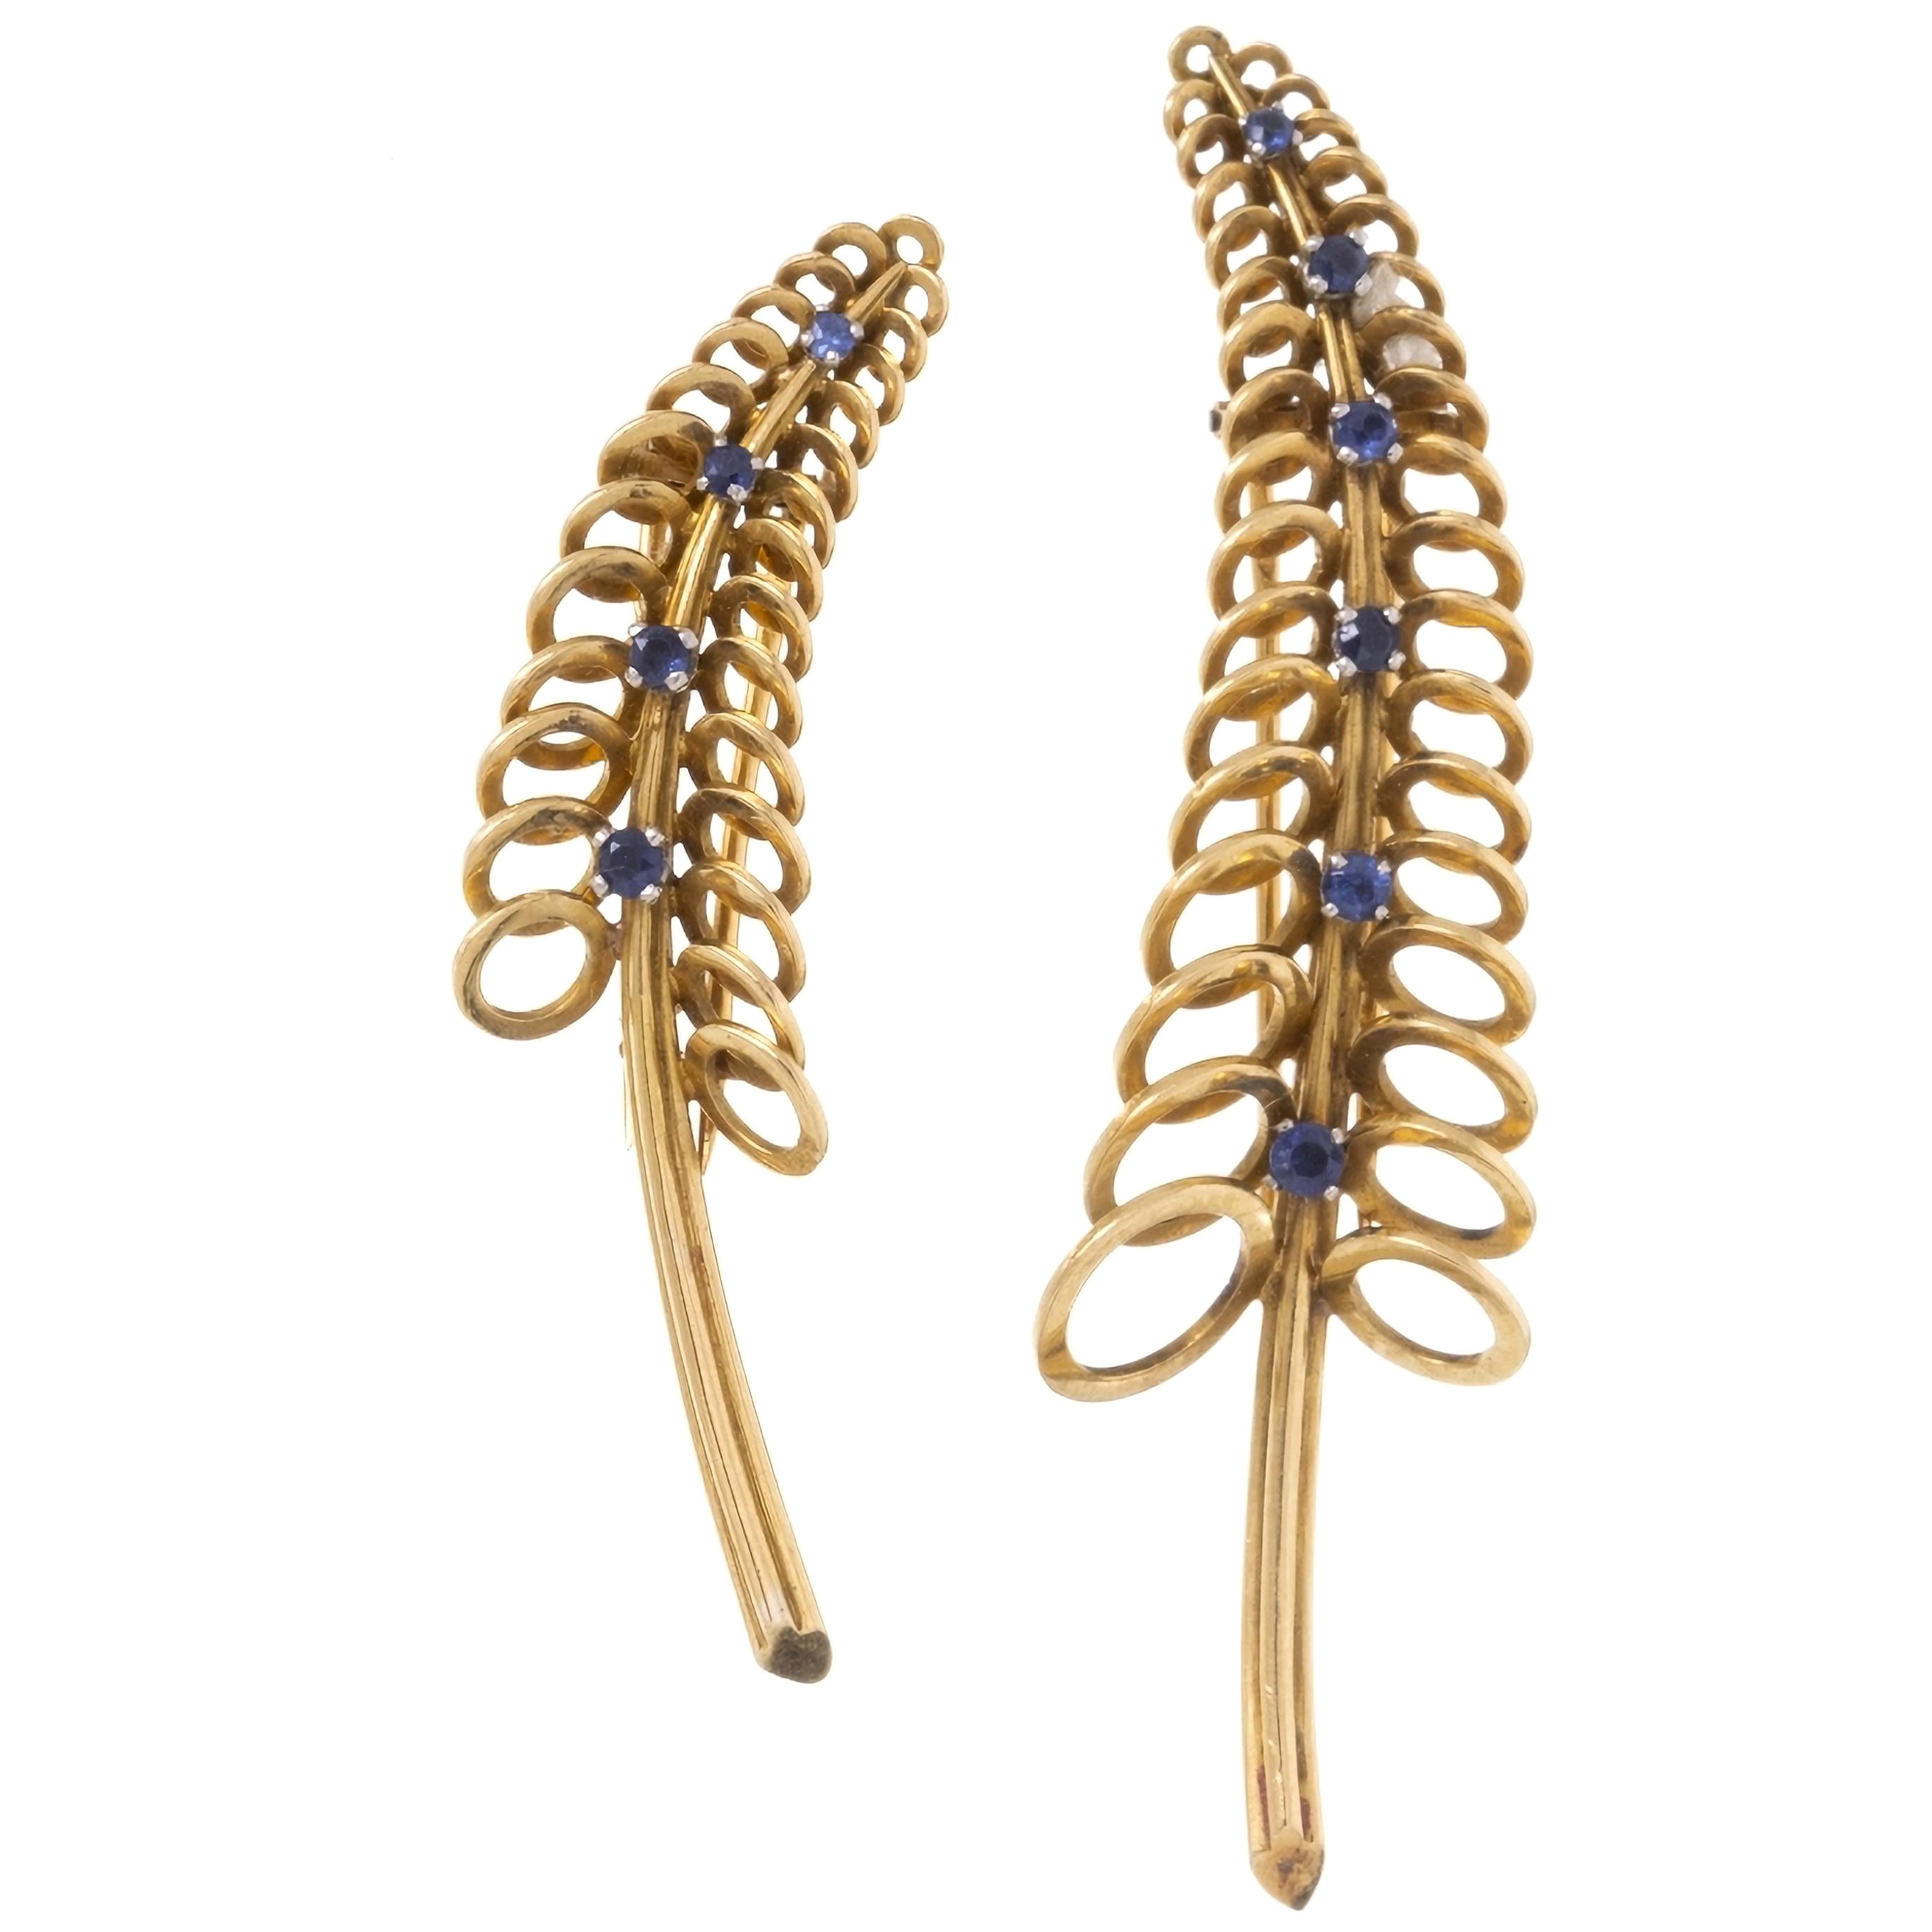 Two Pins in Gold Marchak, Paris, from the End of the 19th Century Art Deco